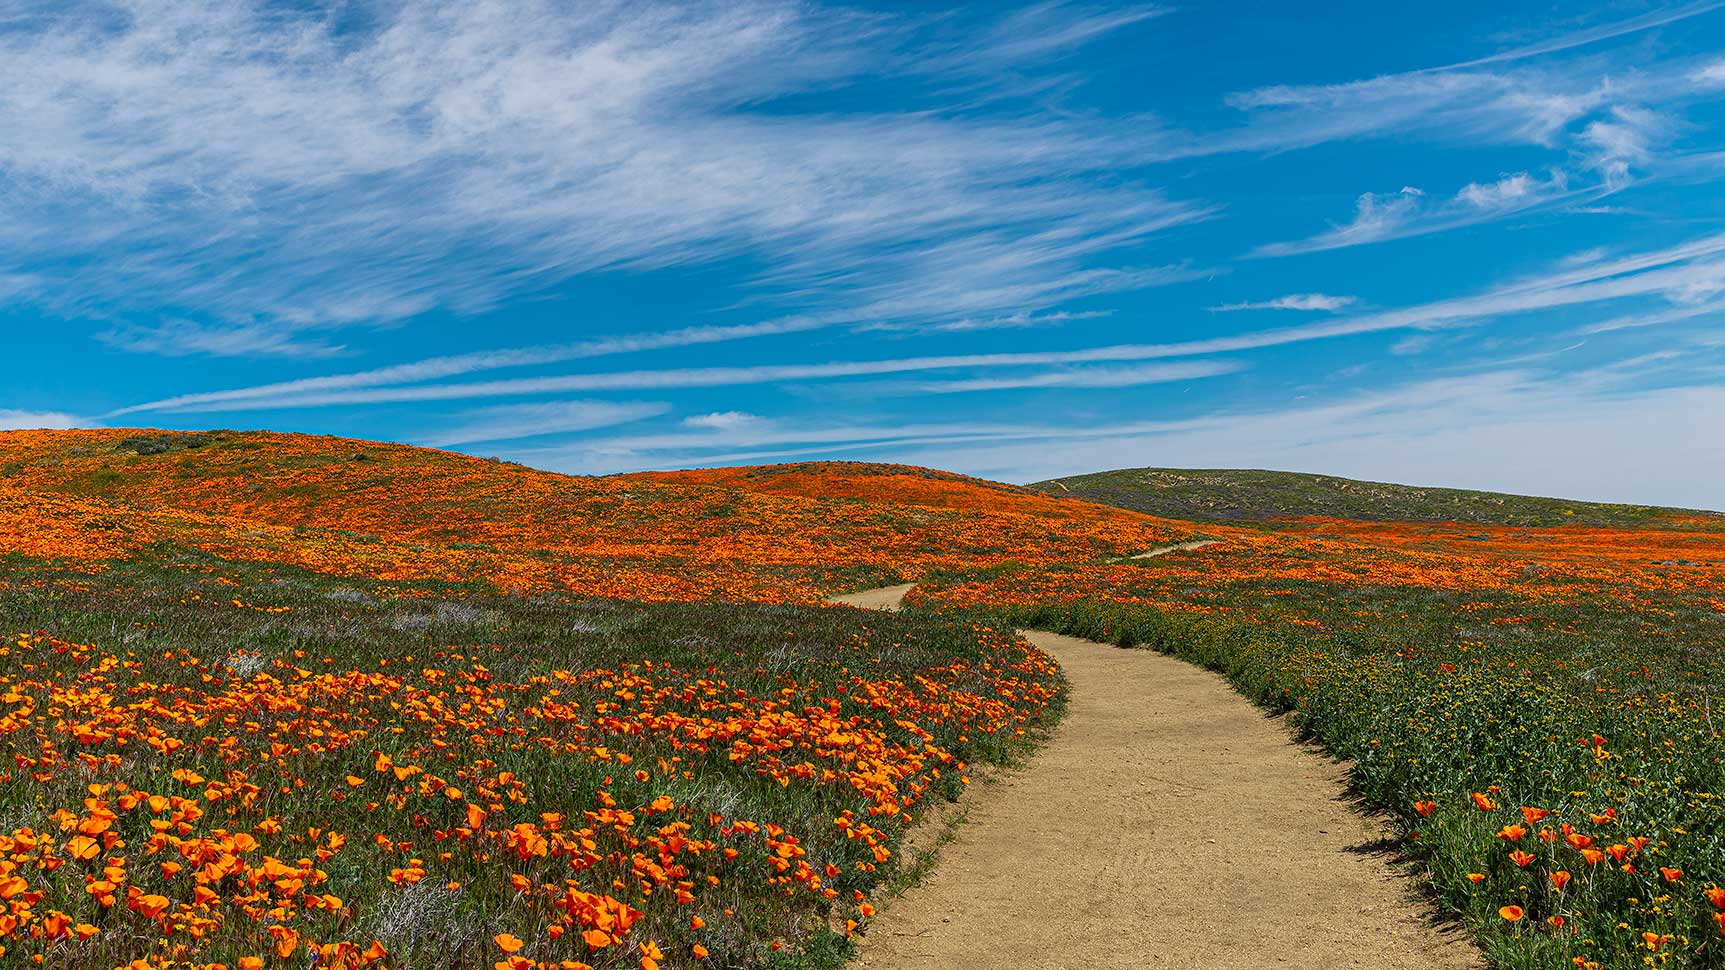 No Poppy Action Yet, but a Poppy-Adjacent Center Just Opened for the Season  – NBC Los Angeles